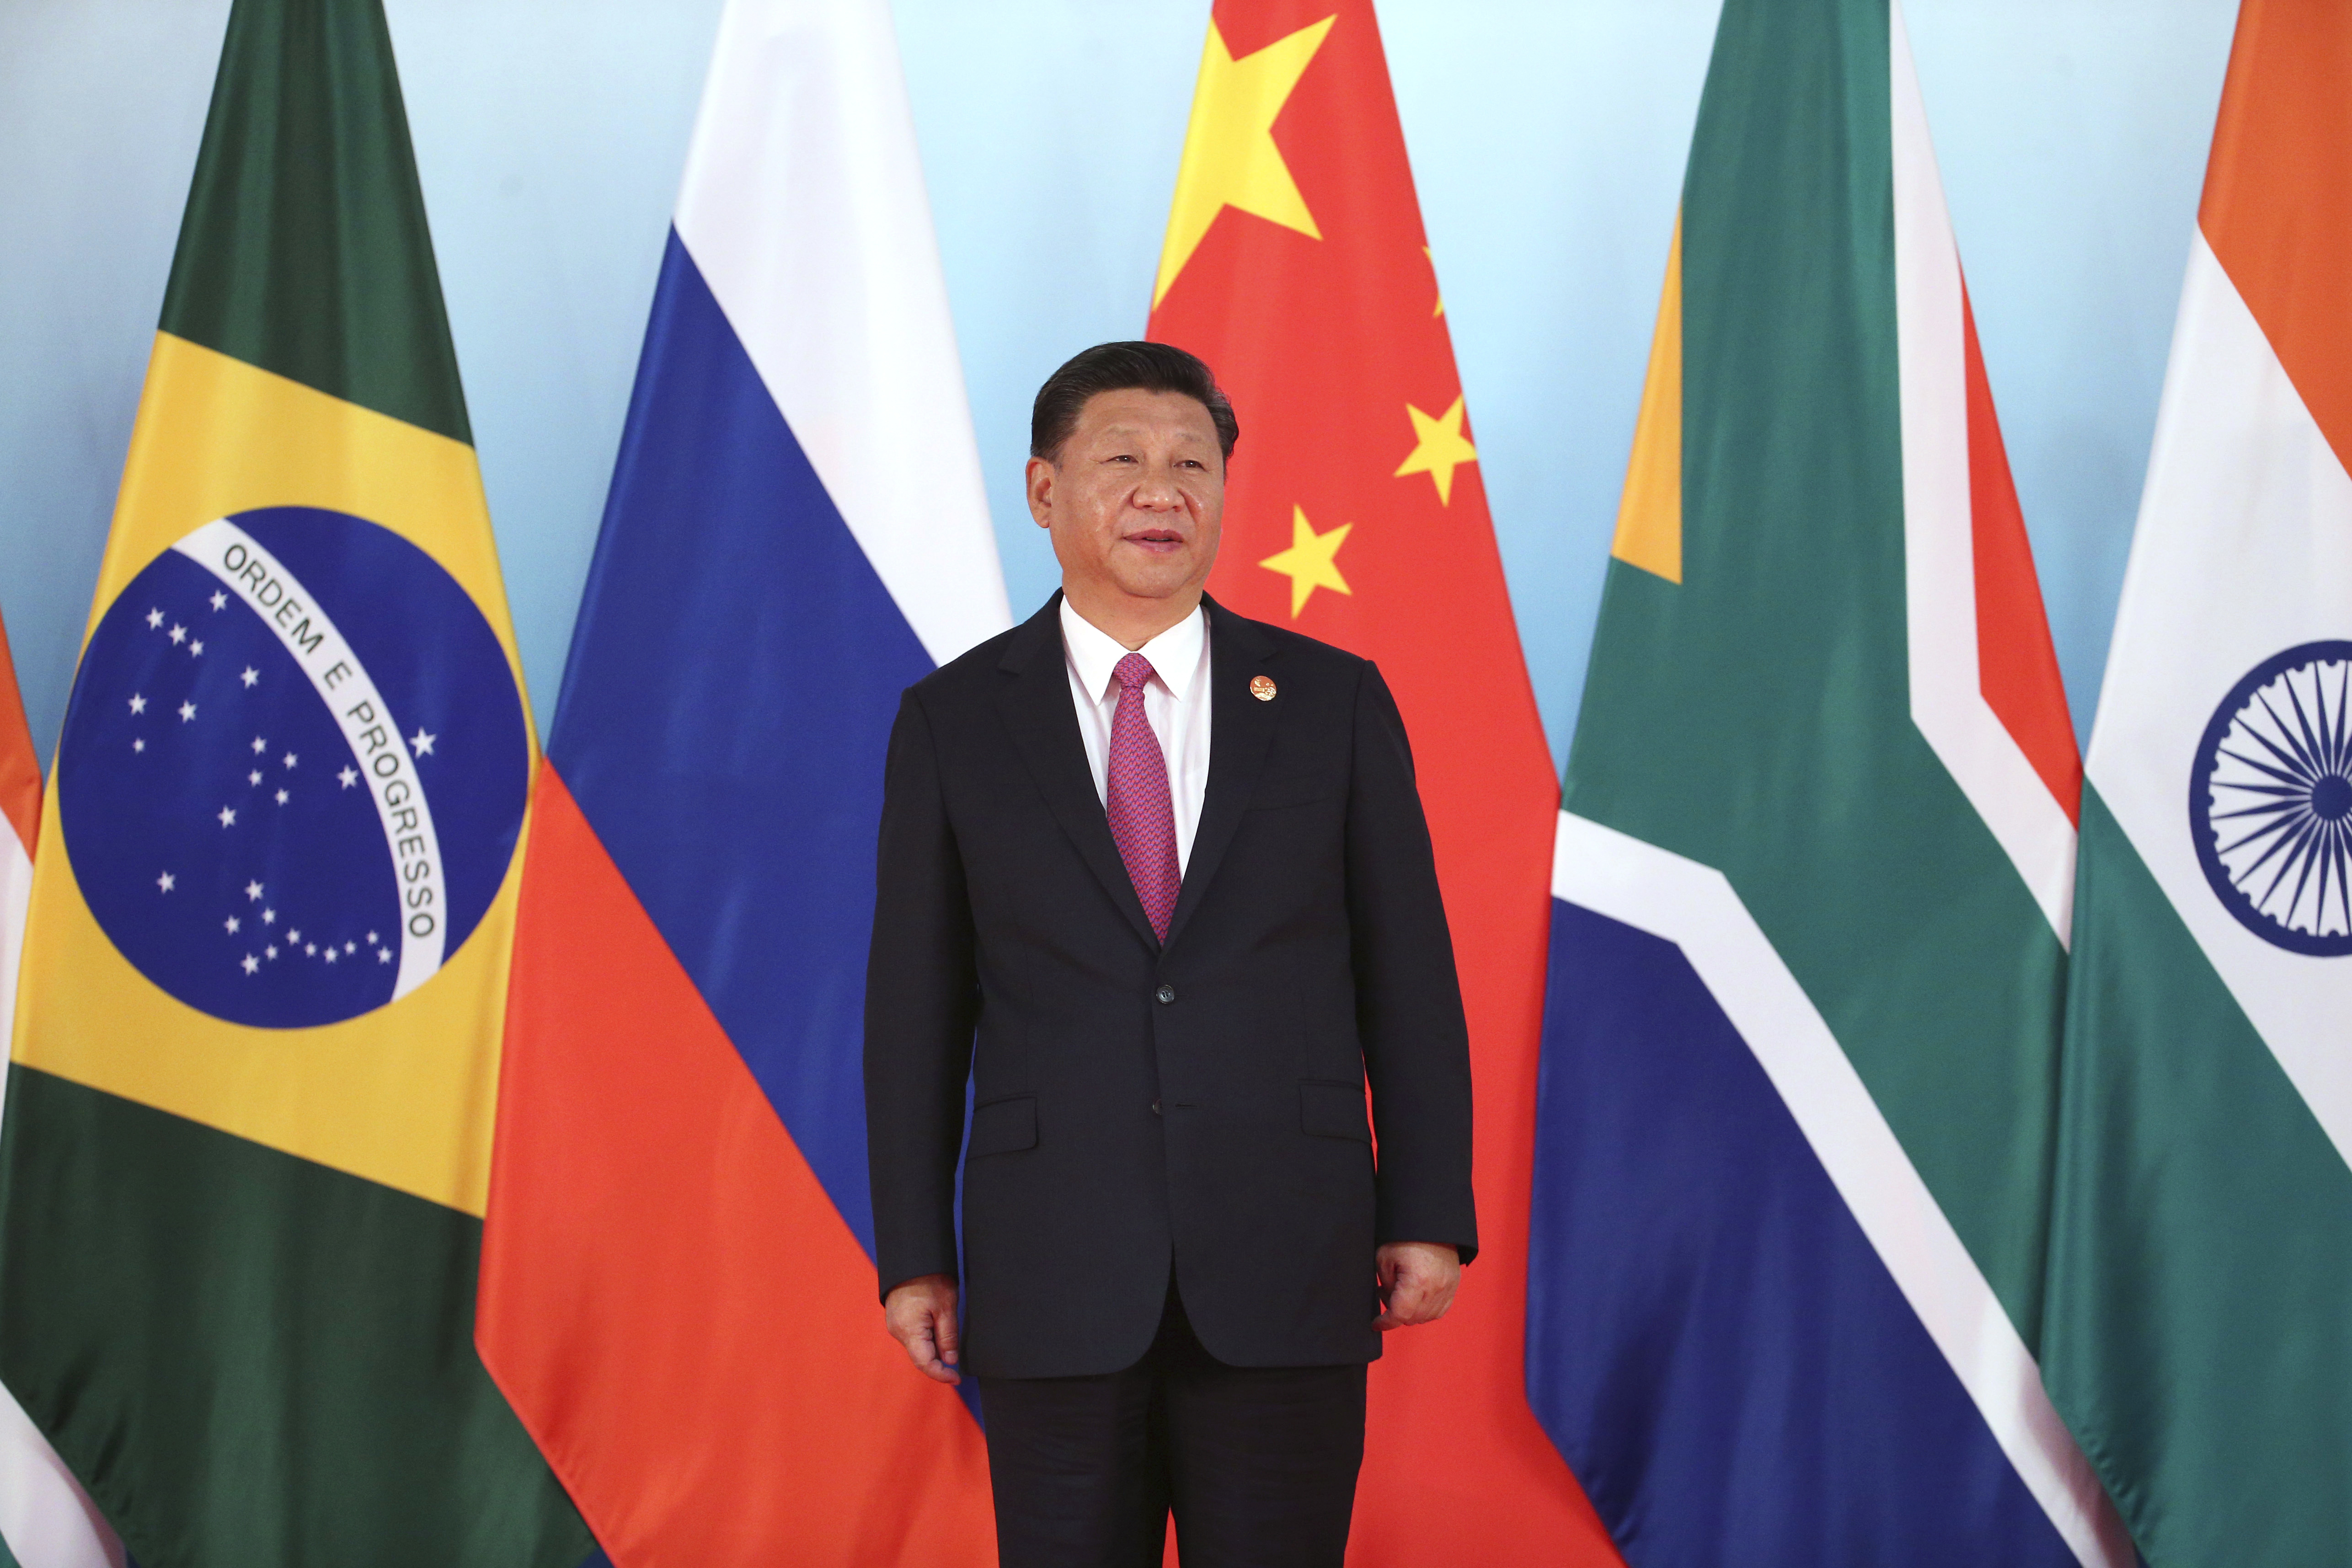 Chinese President Xi Jinping waits for other leaders for a group photo during the BRICS Summit at the Xiamen International Conference and Exhibition Center in Xiamen, southeastern China's Fujian Province, Monday, Sept. 4, 2017. (Wu Hong/Pool Photo via AP)